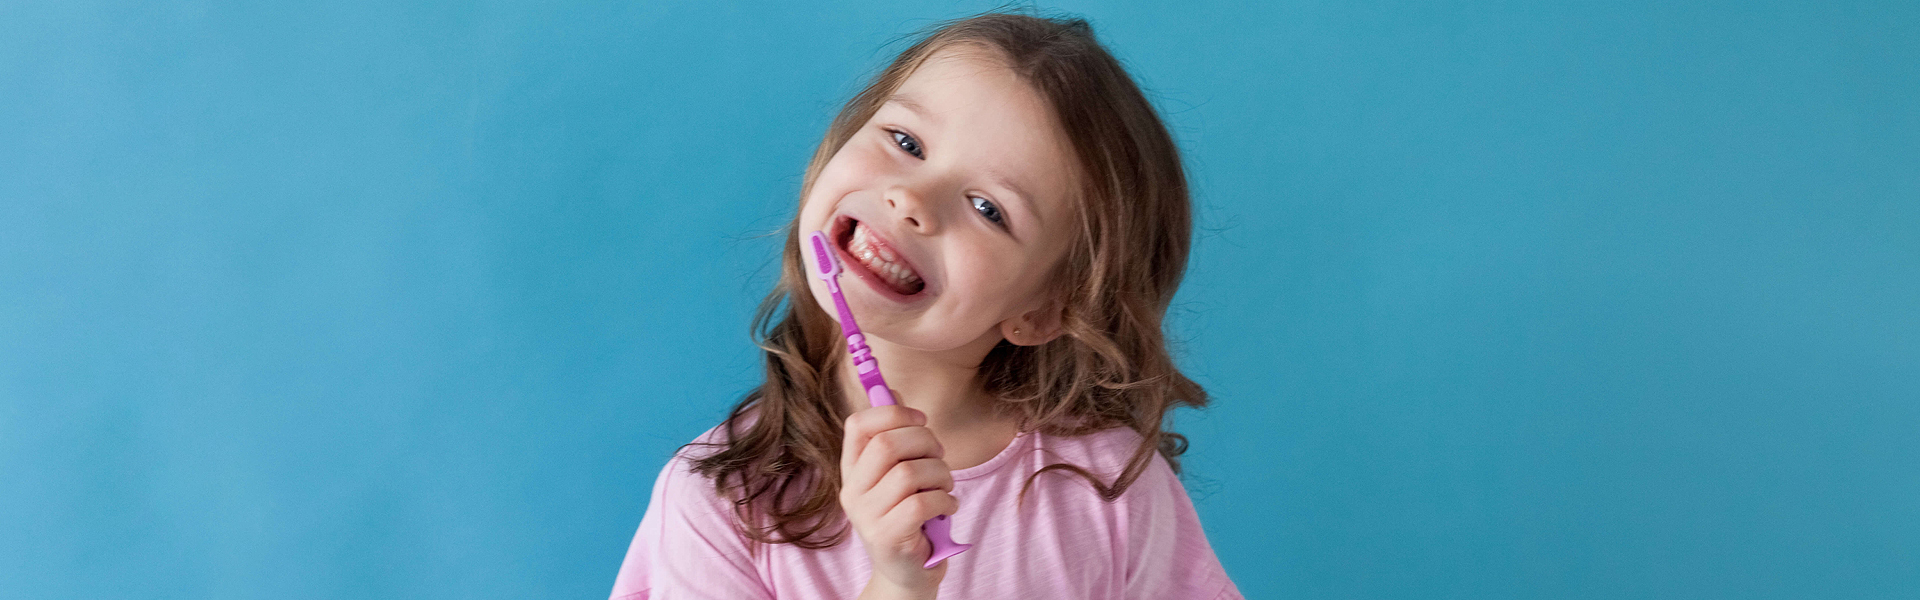 Pediatric Teledentistry Helping Children from Lower-Income Households Access Dental Care Easily